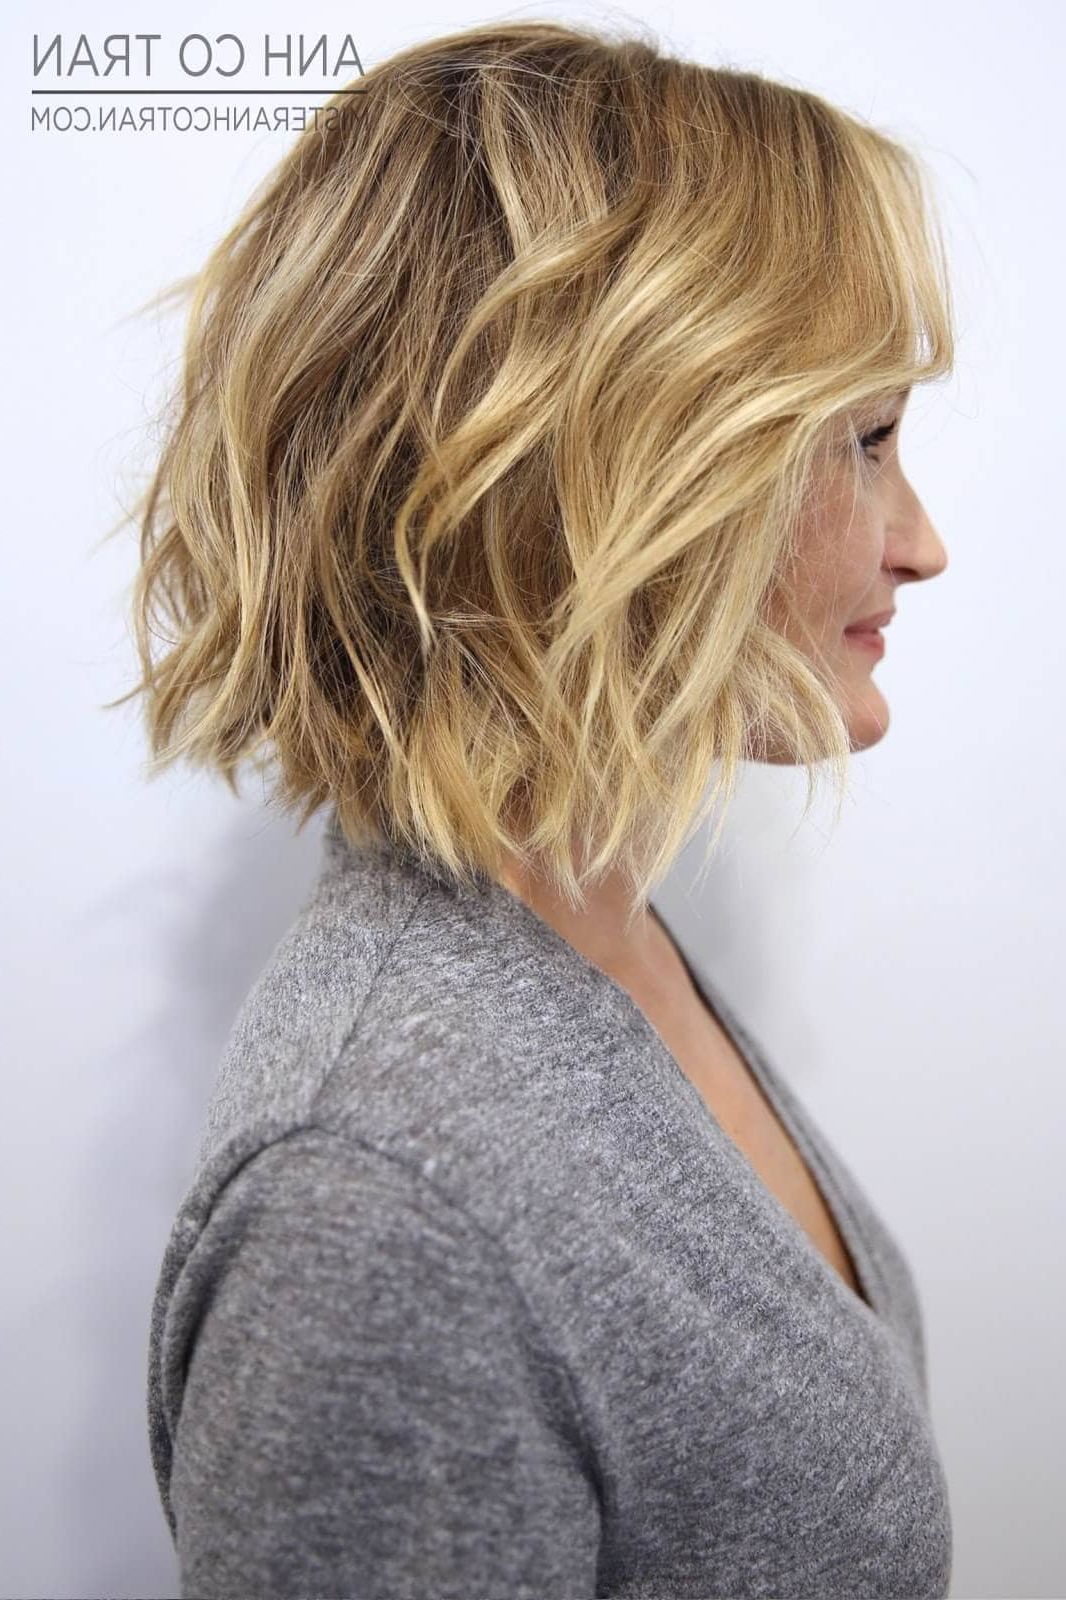 Well Known Fringe Hairstyles With Beachy Vibes Pertaining To 50 Ways To Wear Short Hair With Bangs For A Fresh New Look (View 16 of 20)